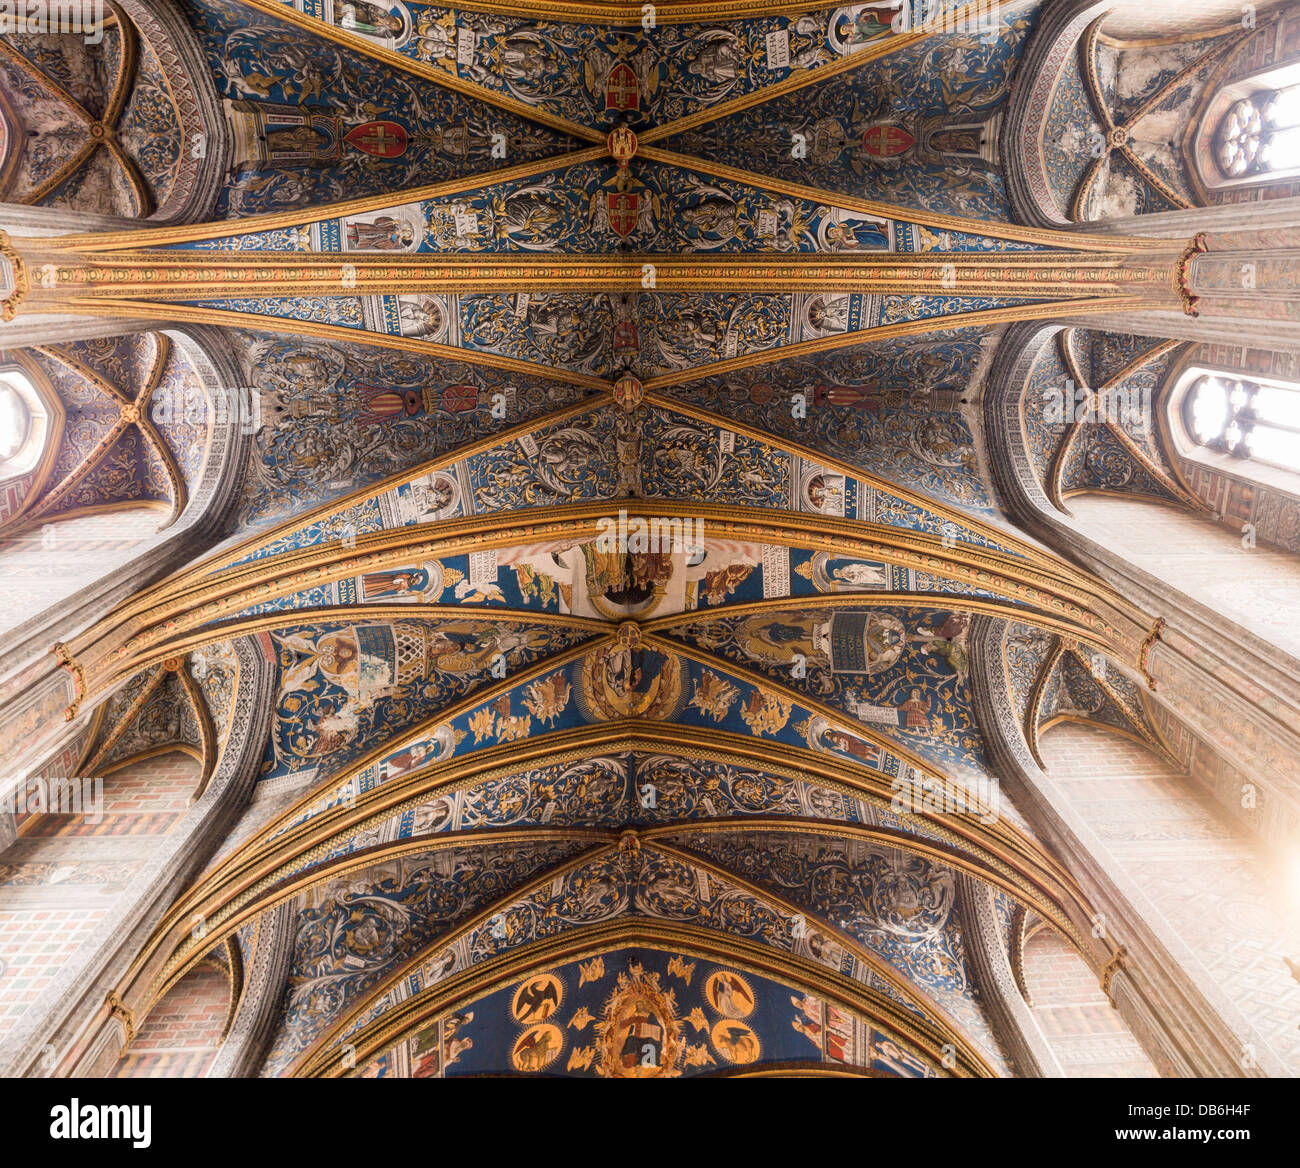 St Cecil Cathedral Ceiling and windows. The ornate decorated ceiling of Albi's great cathedral. Stock Photo